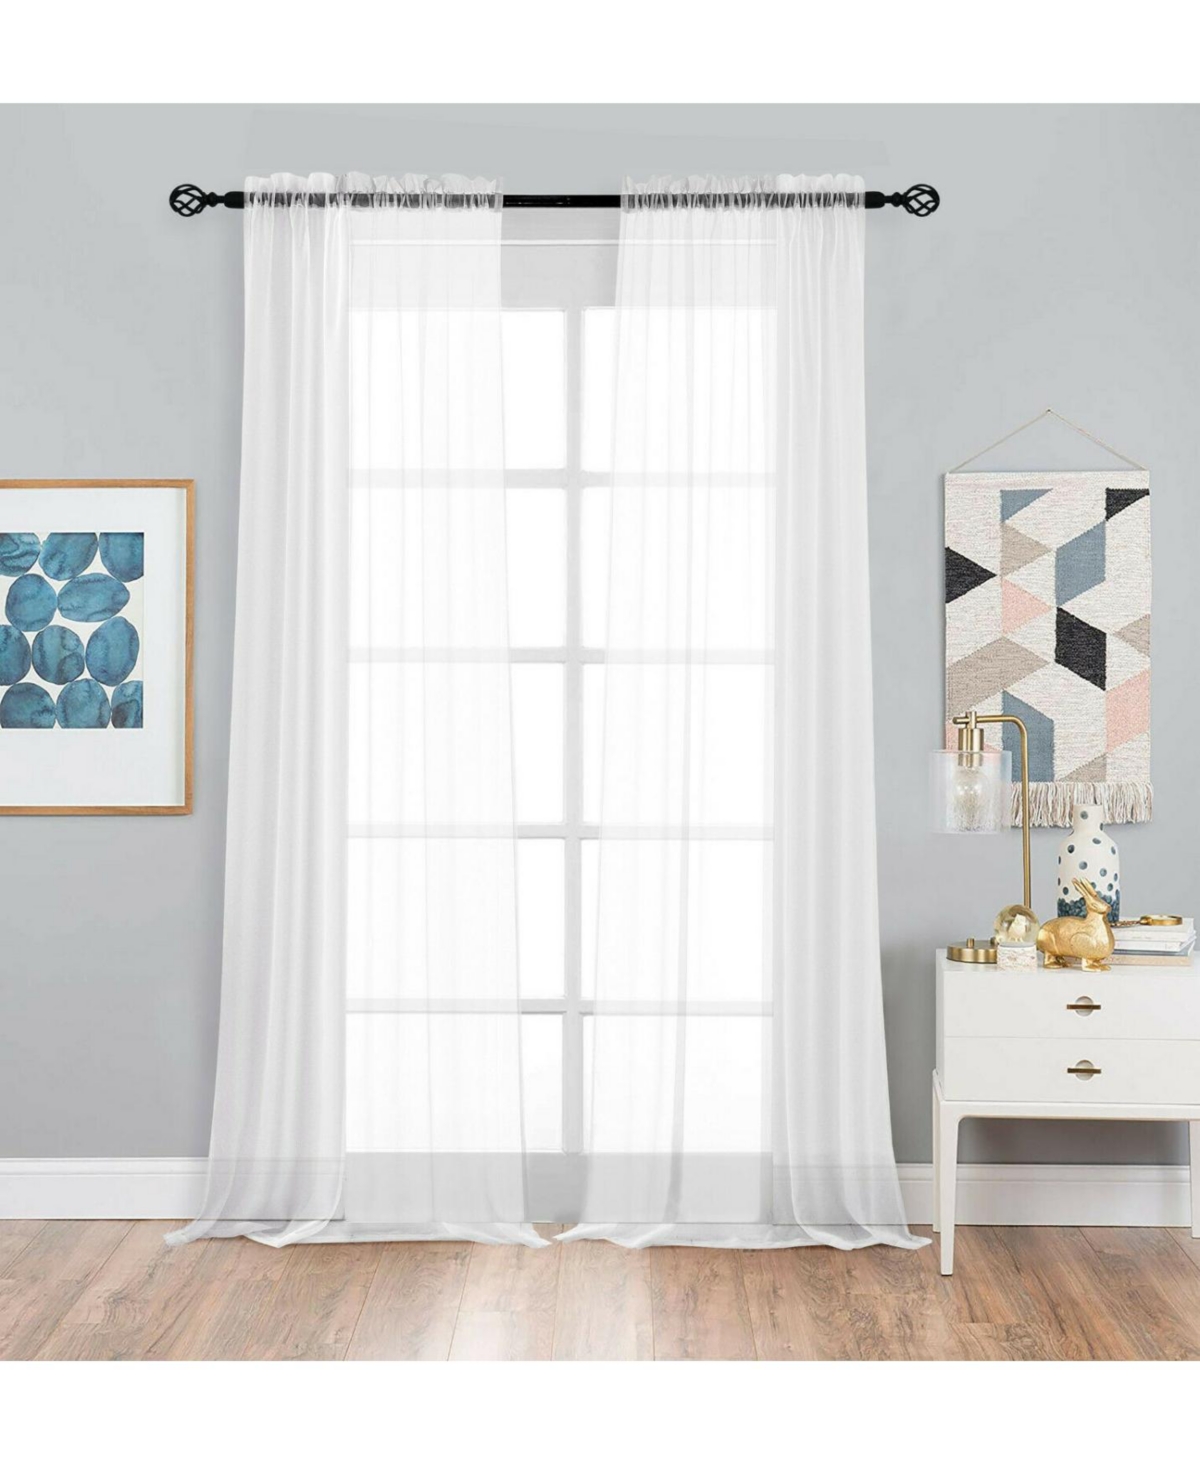 2 Pack Basic Home Rod Pocket Sheer Voile Window Curtains - Ivory